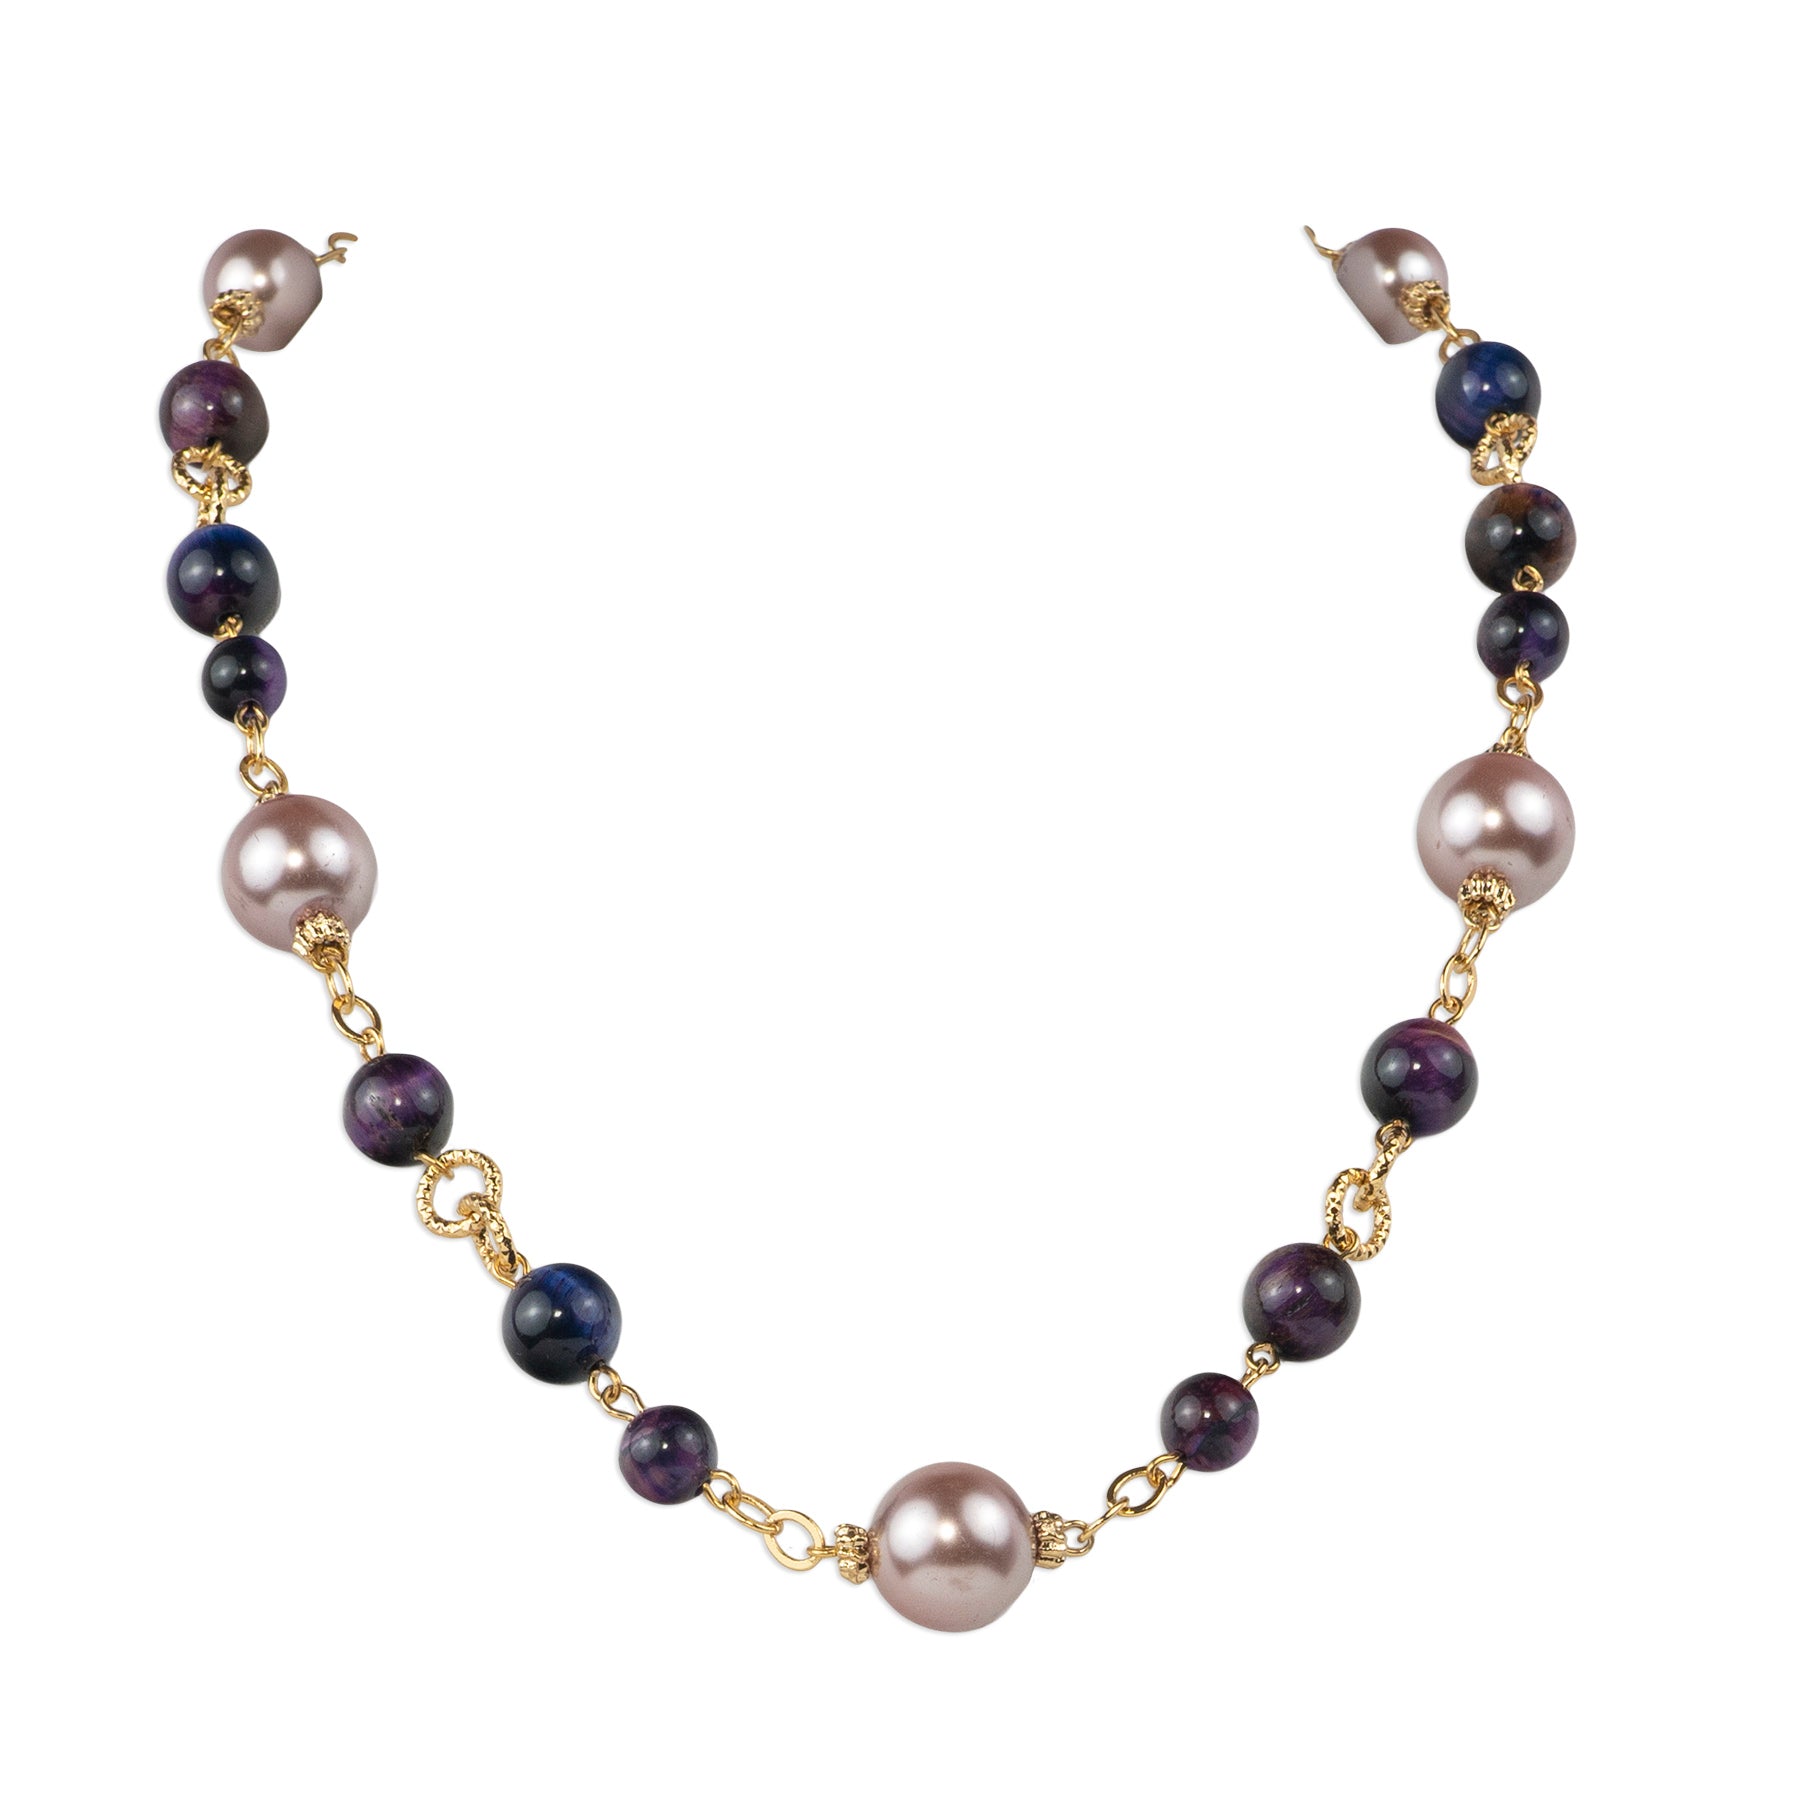 Gemstone and pearl chain choker necklace